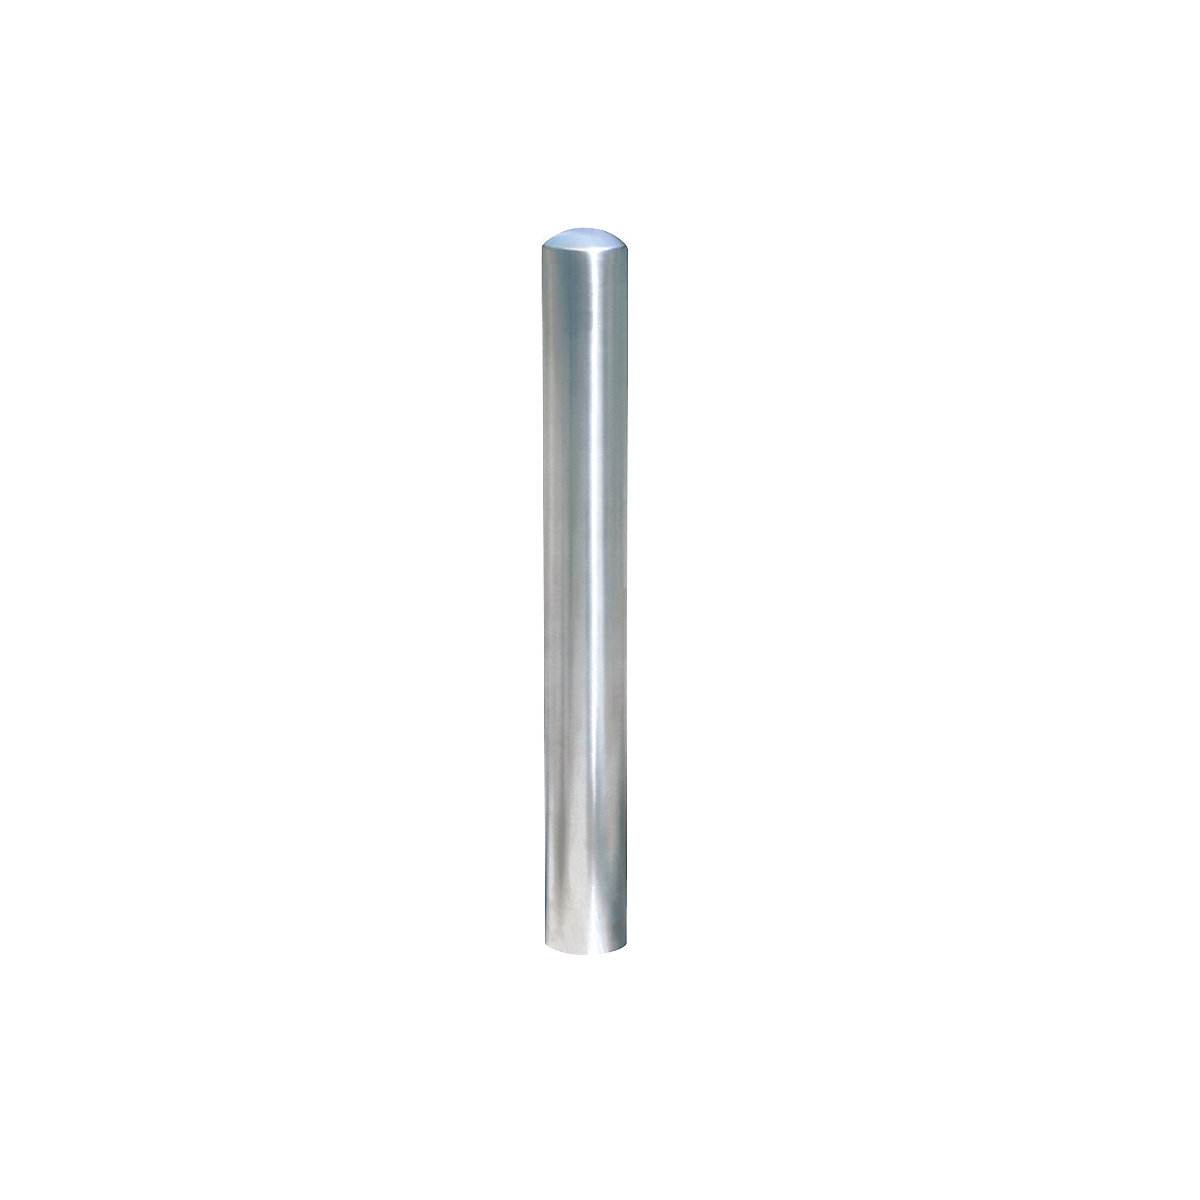 Stainless steel bollard, ground sleeve for removal, with cylinder lock, Ø 108 mm-3